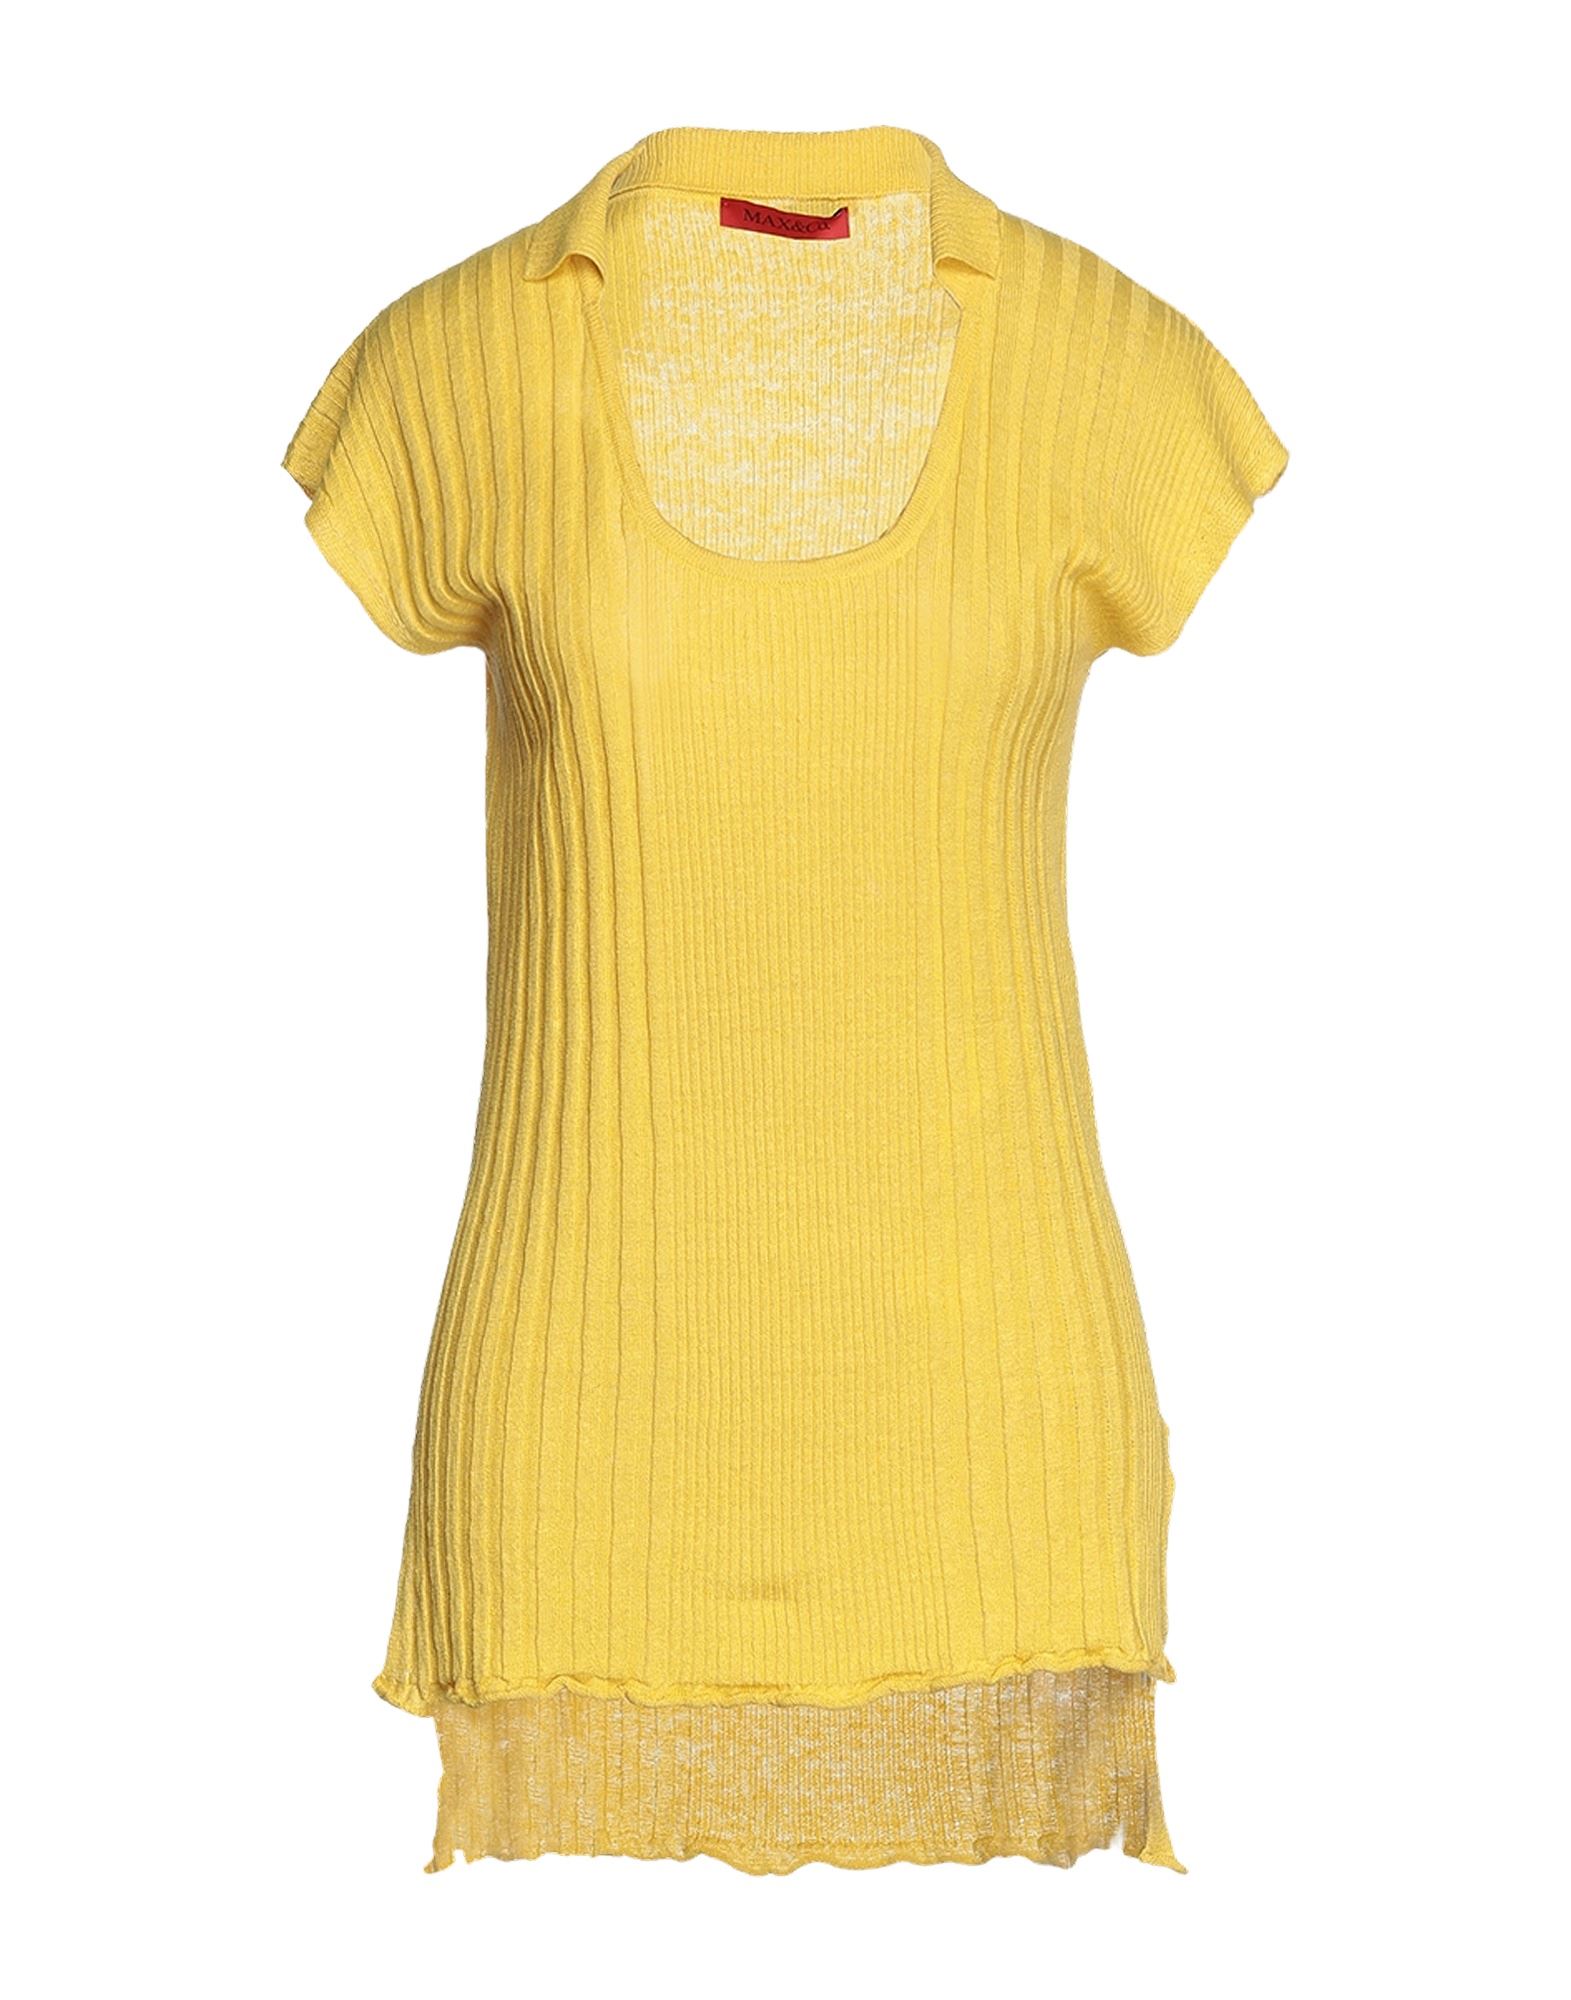 Shop Max & Co . Woman Sweater Yellow Size M Linen